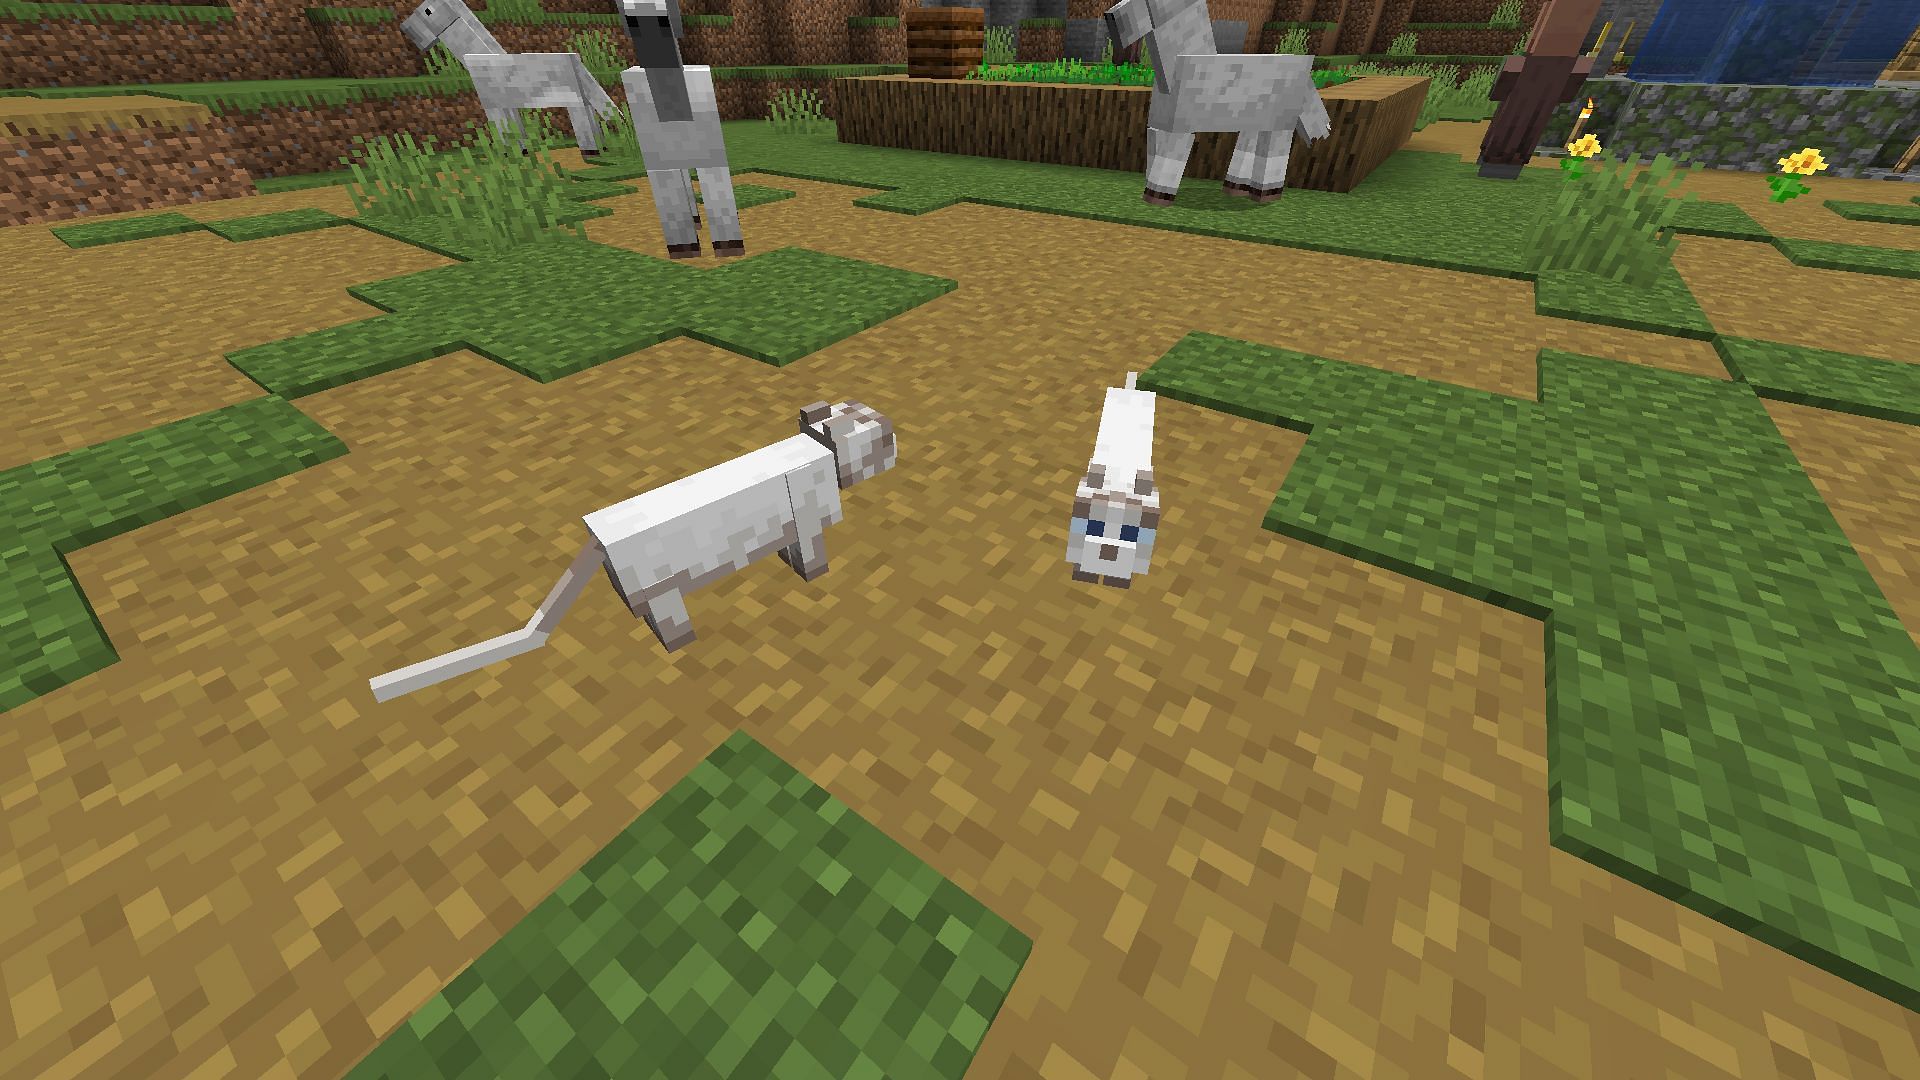 Cats are one of the cutest friendly mobs in Minecraft (Image via Mojang)